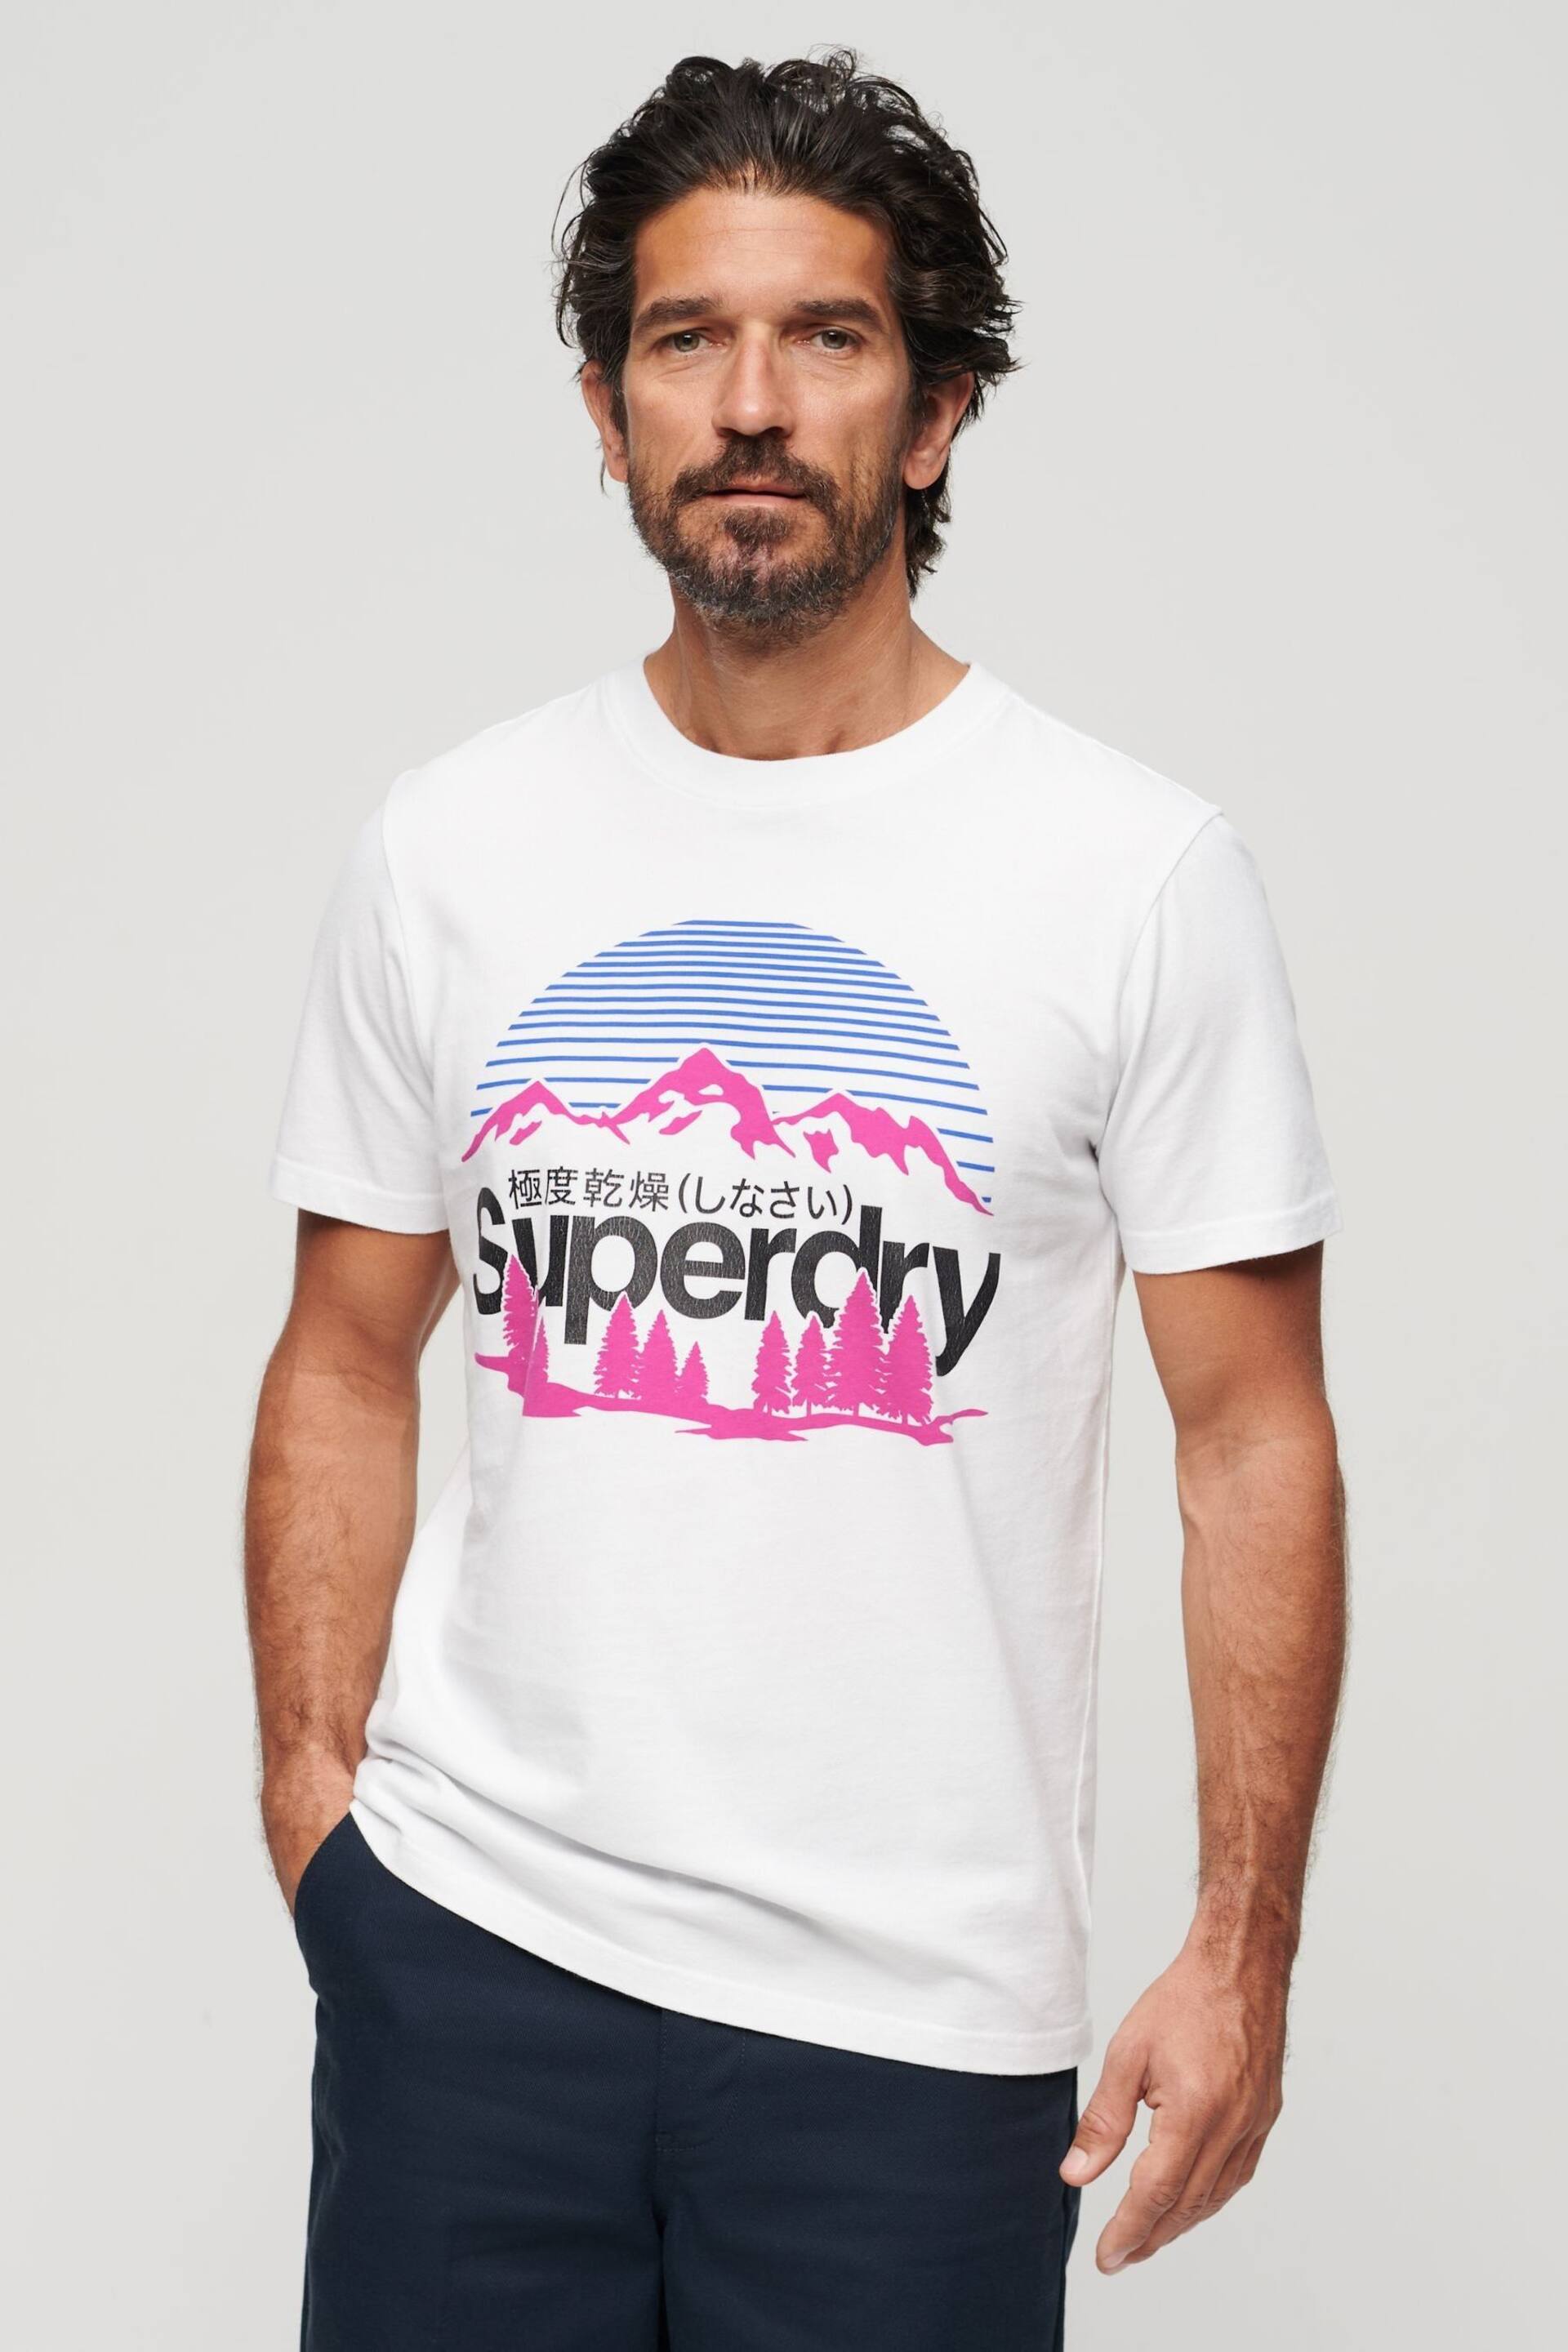 Superdry White Great Outdoors Graphic T-Shirt - Image 1 of 3